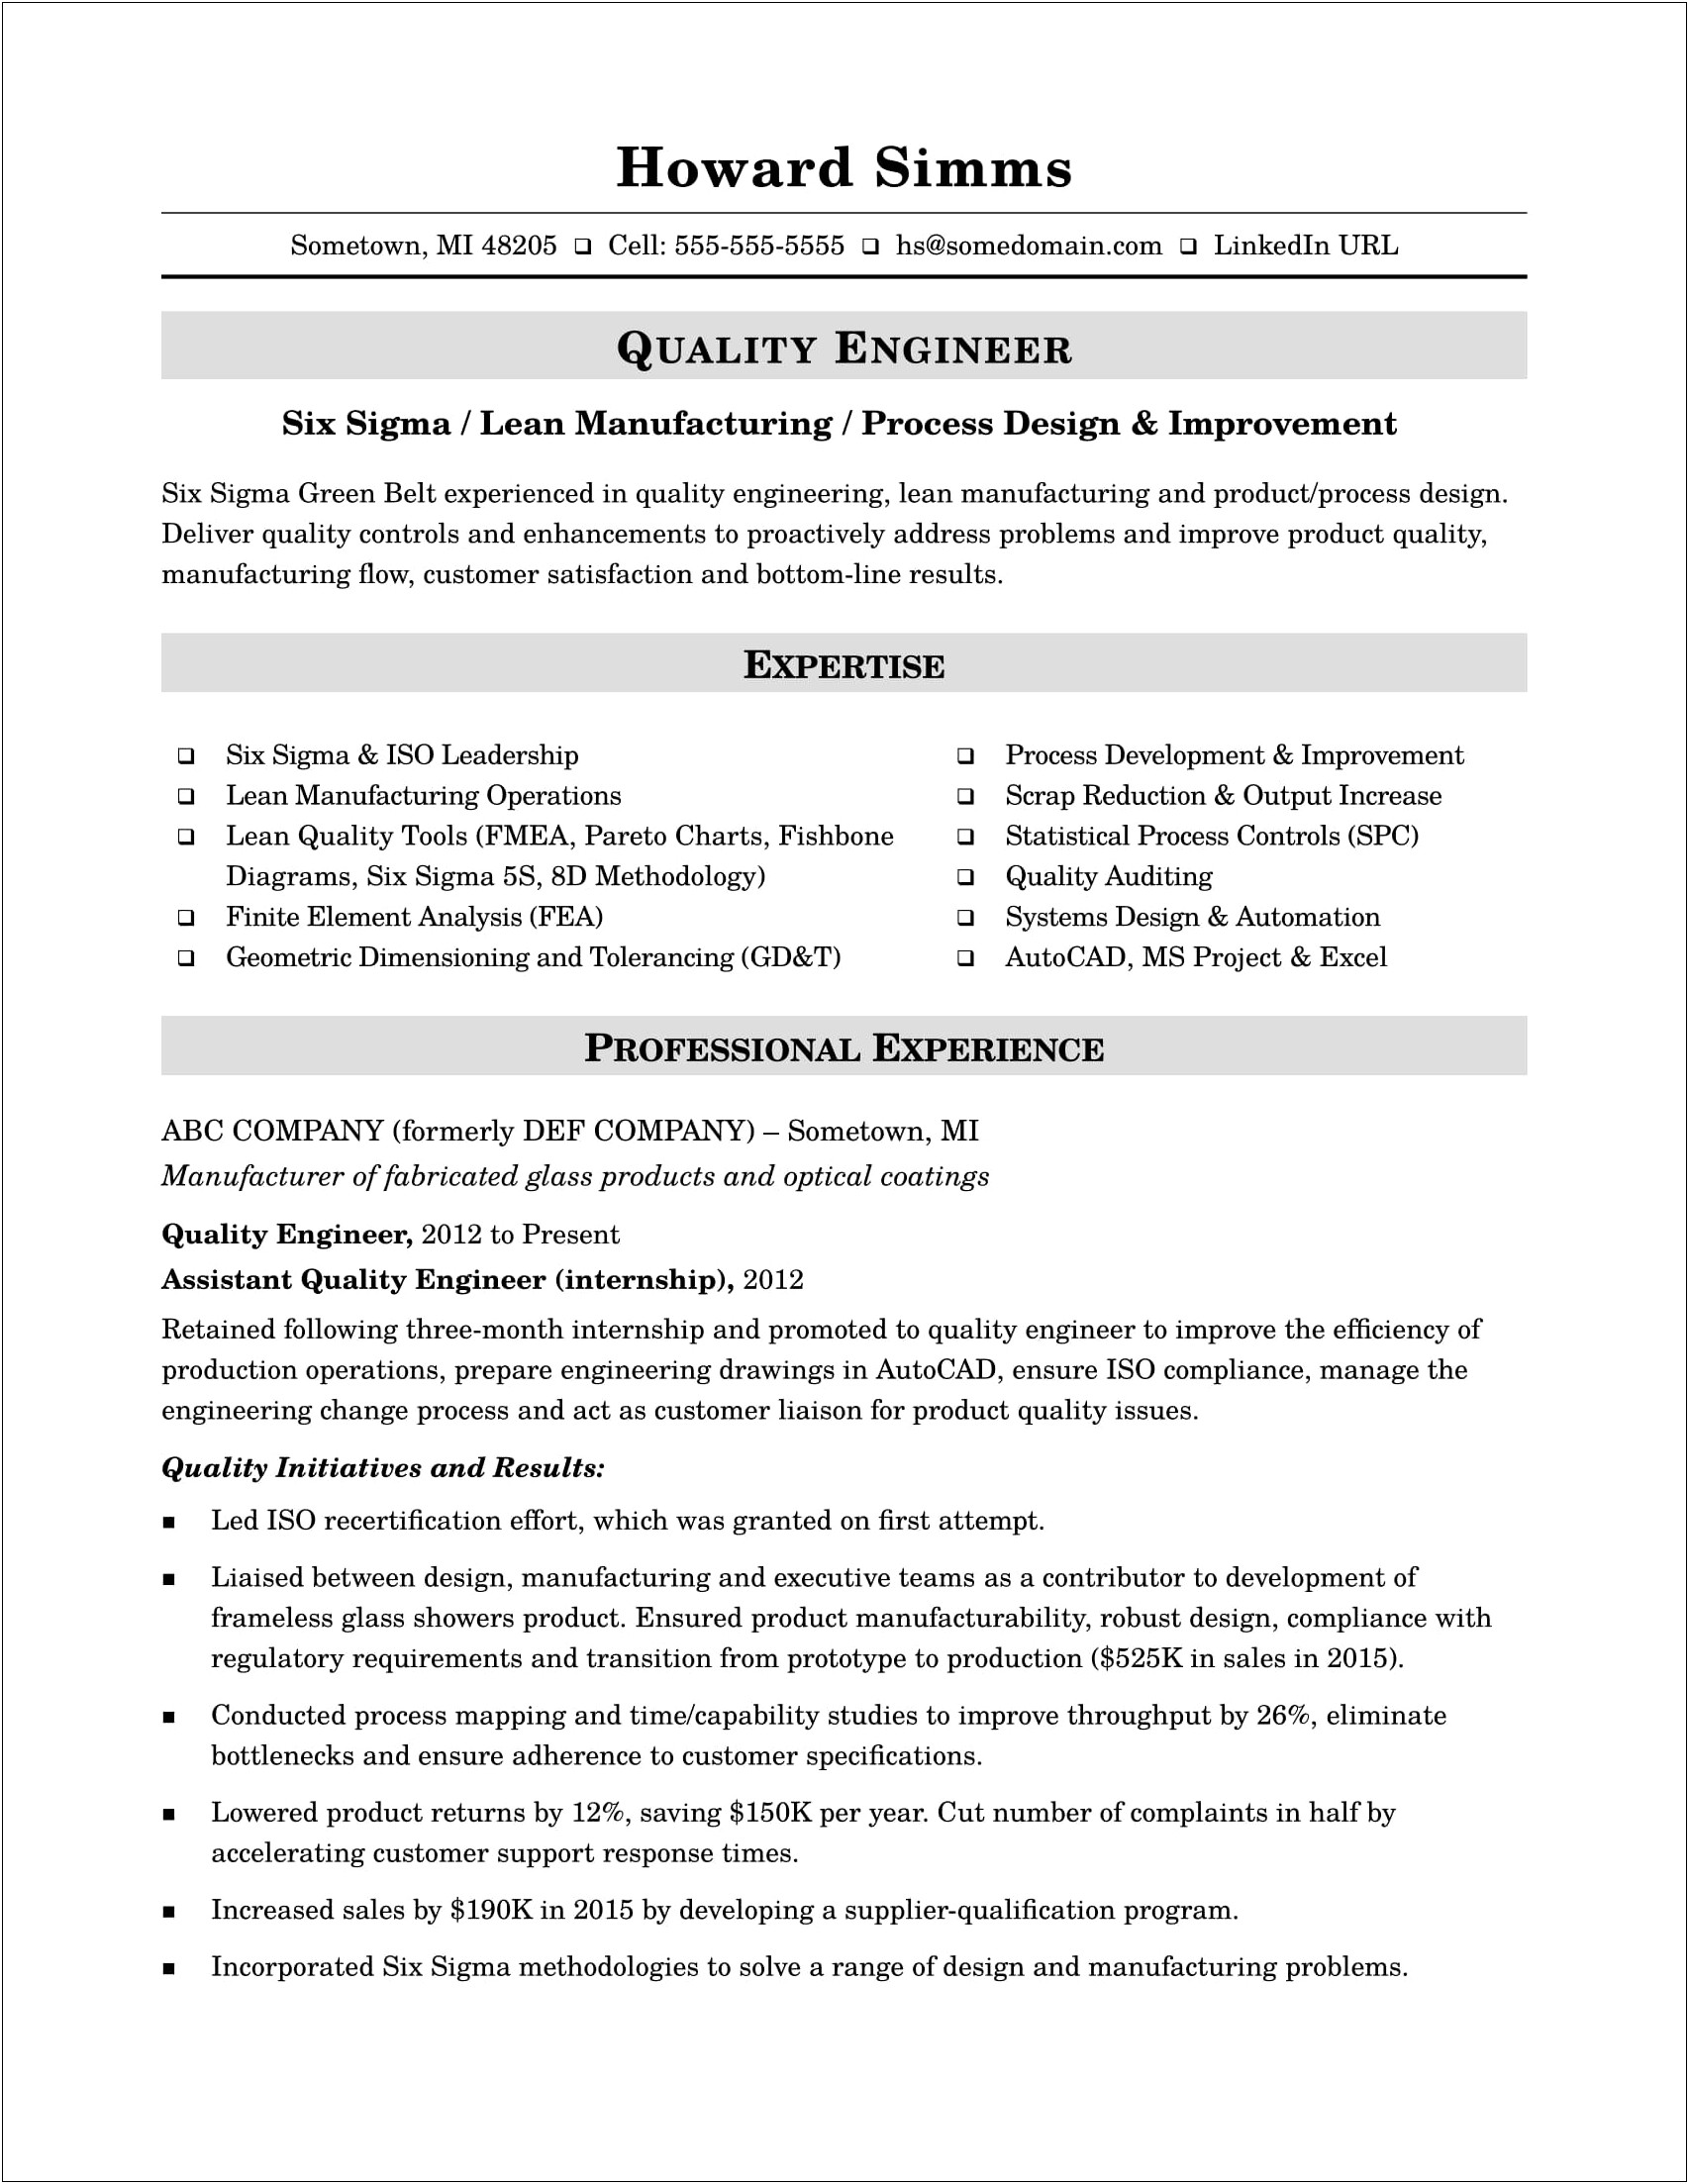 Sample Of Resume Woth Lines